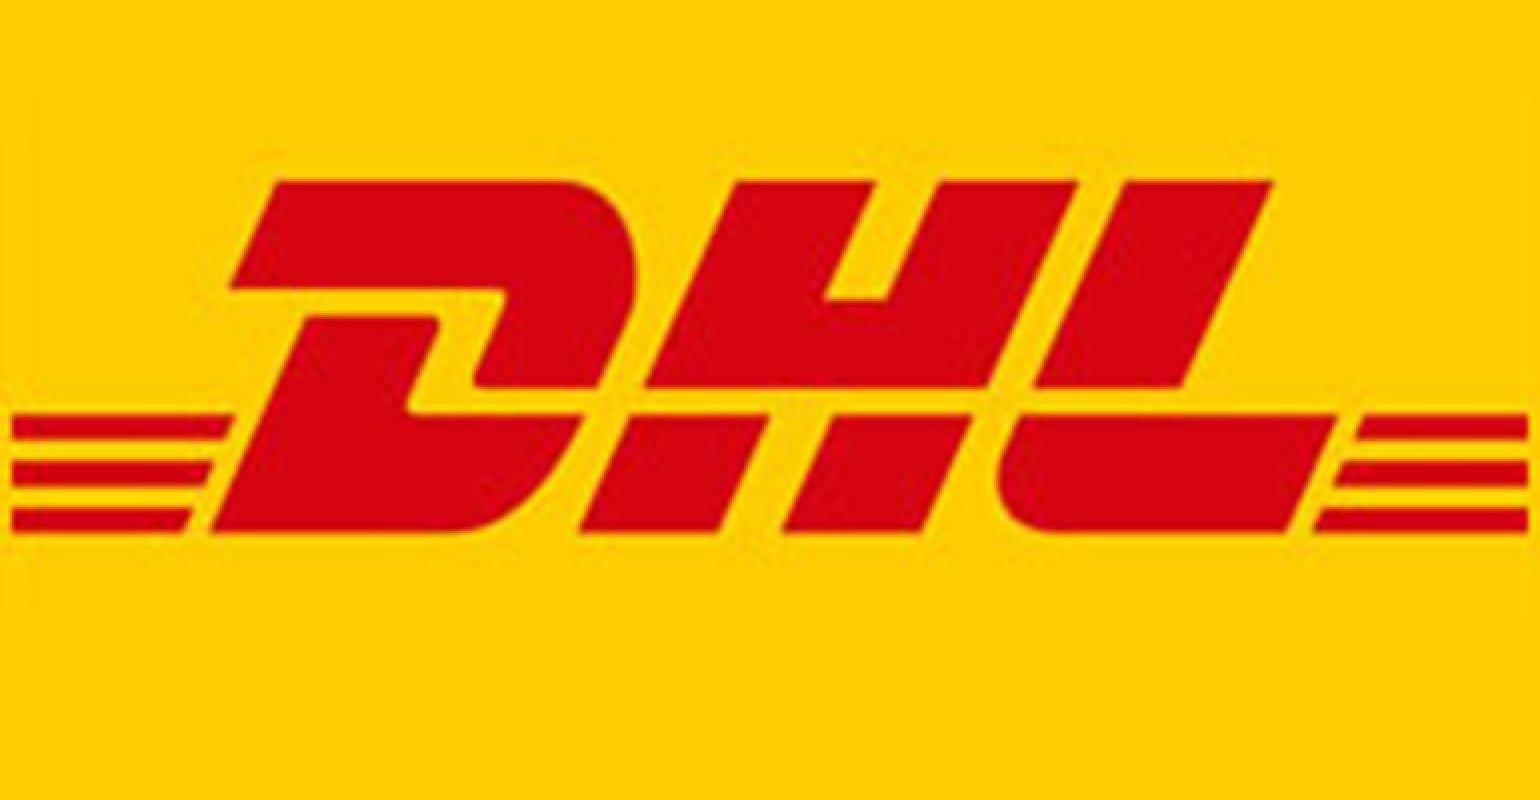 DHL New Logo - Supply Chain Visibility Platform. Material Handling and Logistics